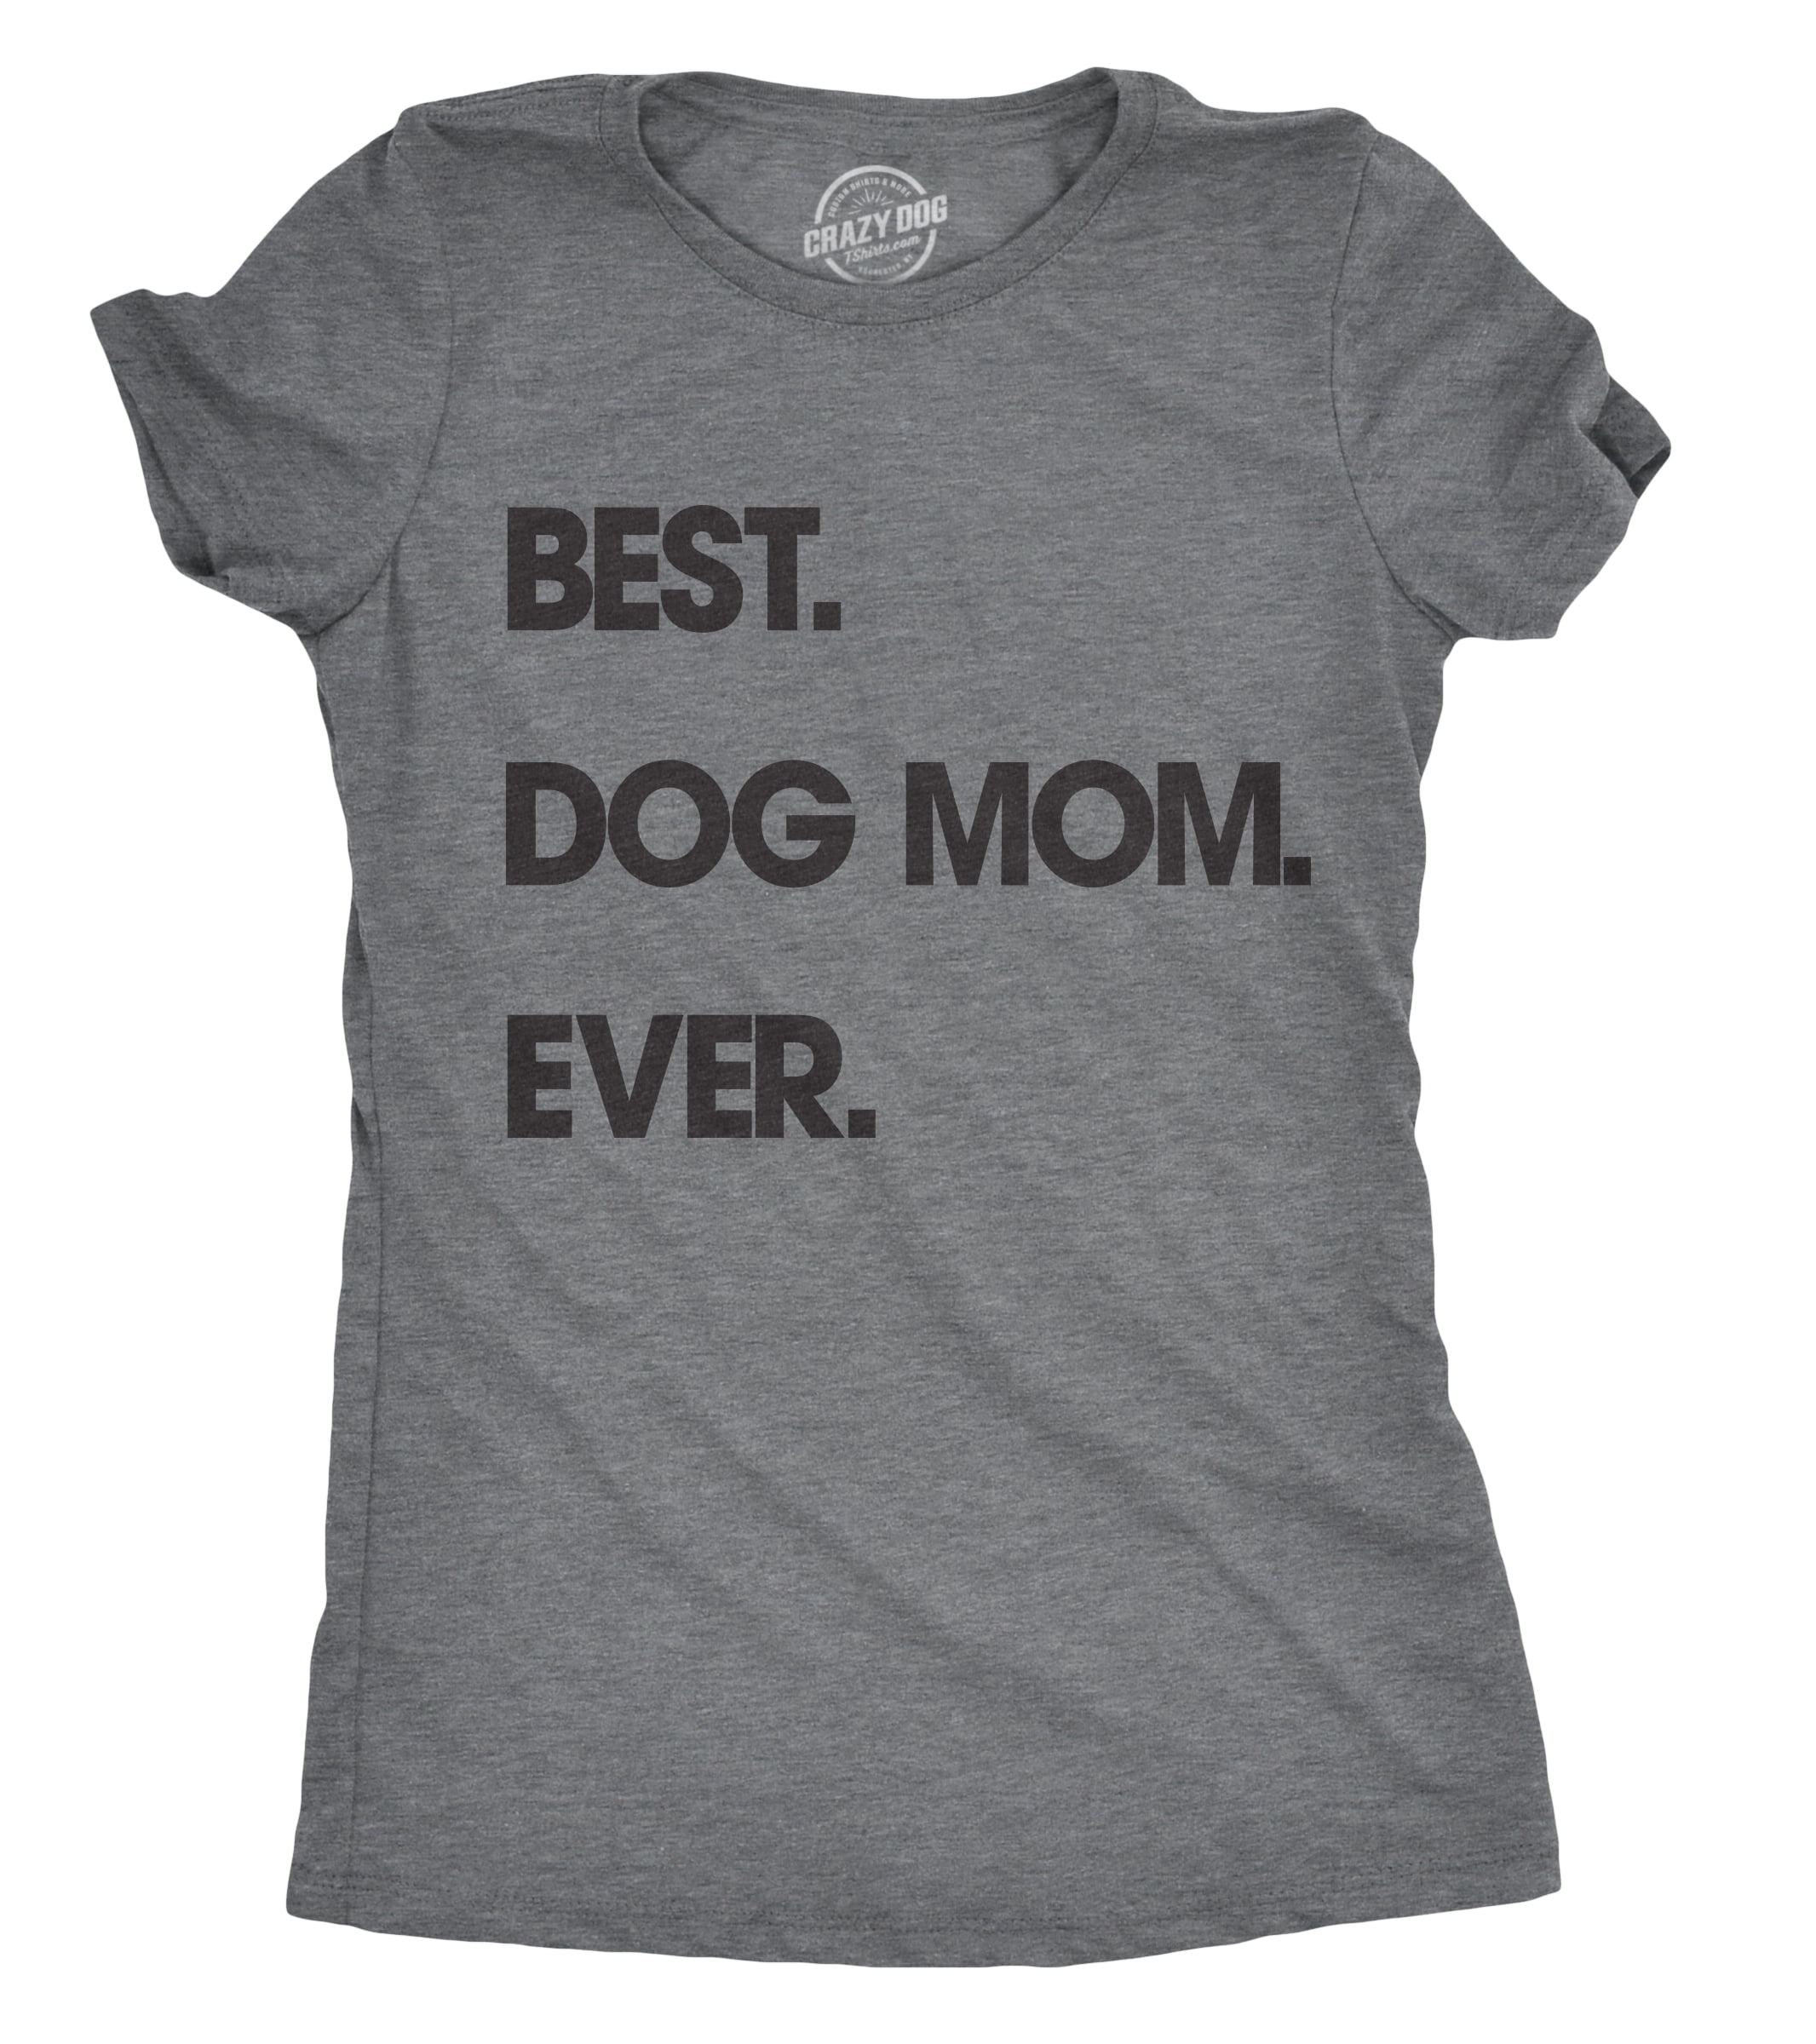 dog mama shirt dog mom tee gift for dog lover thinking about dogs I love my dog shirt Dog t shirt for women new puppy Funny dog shirt